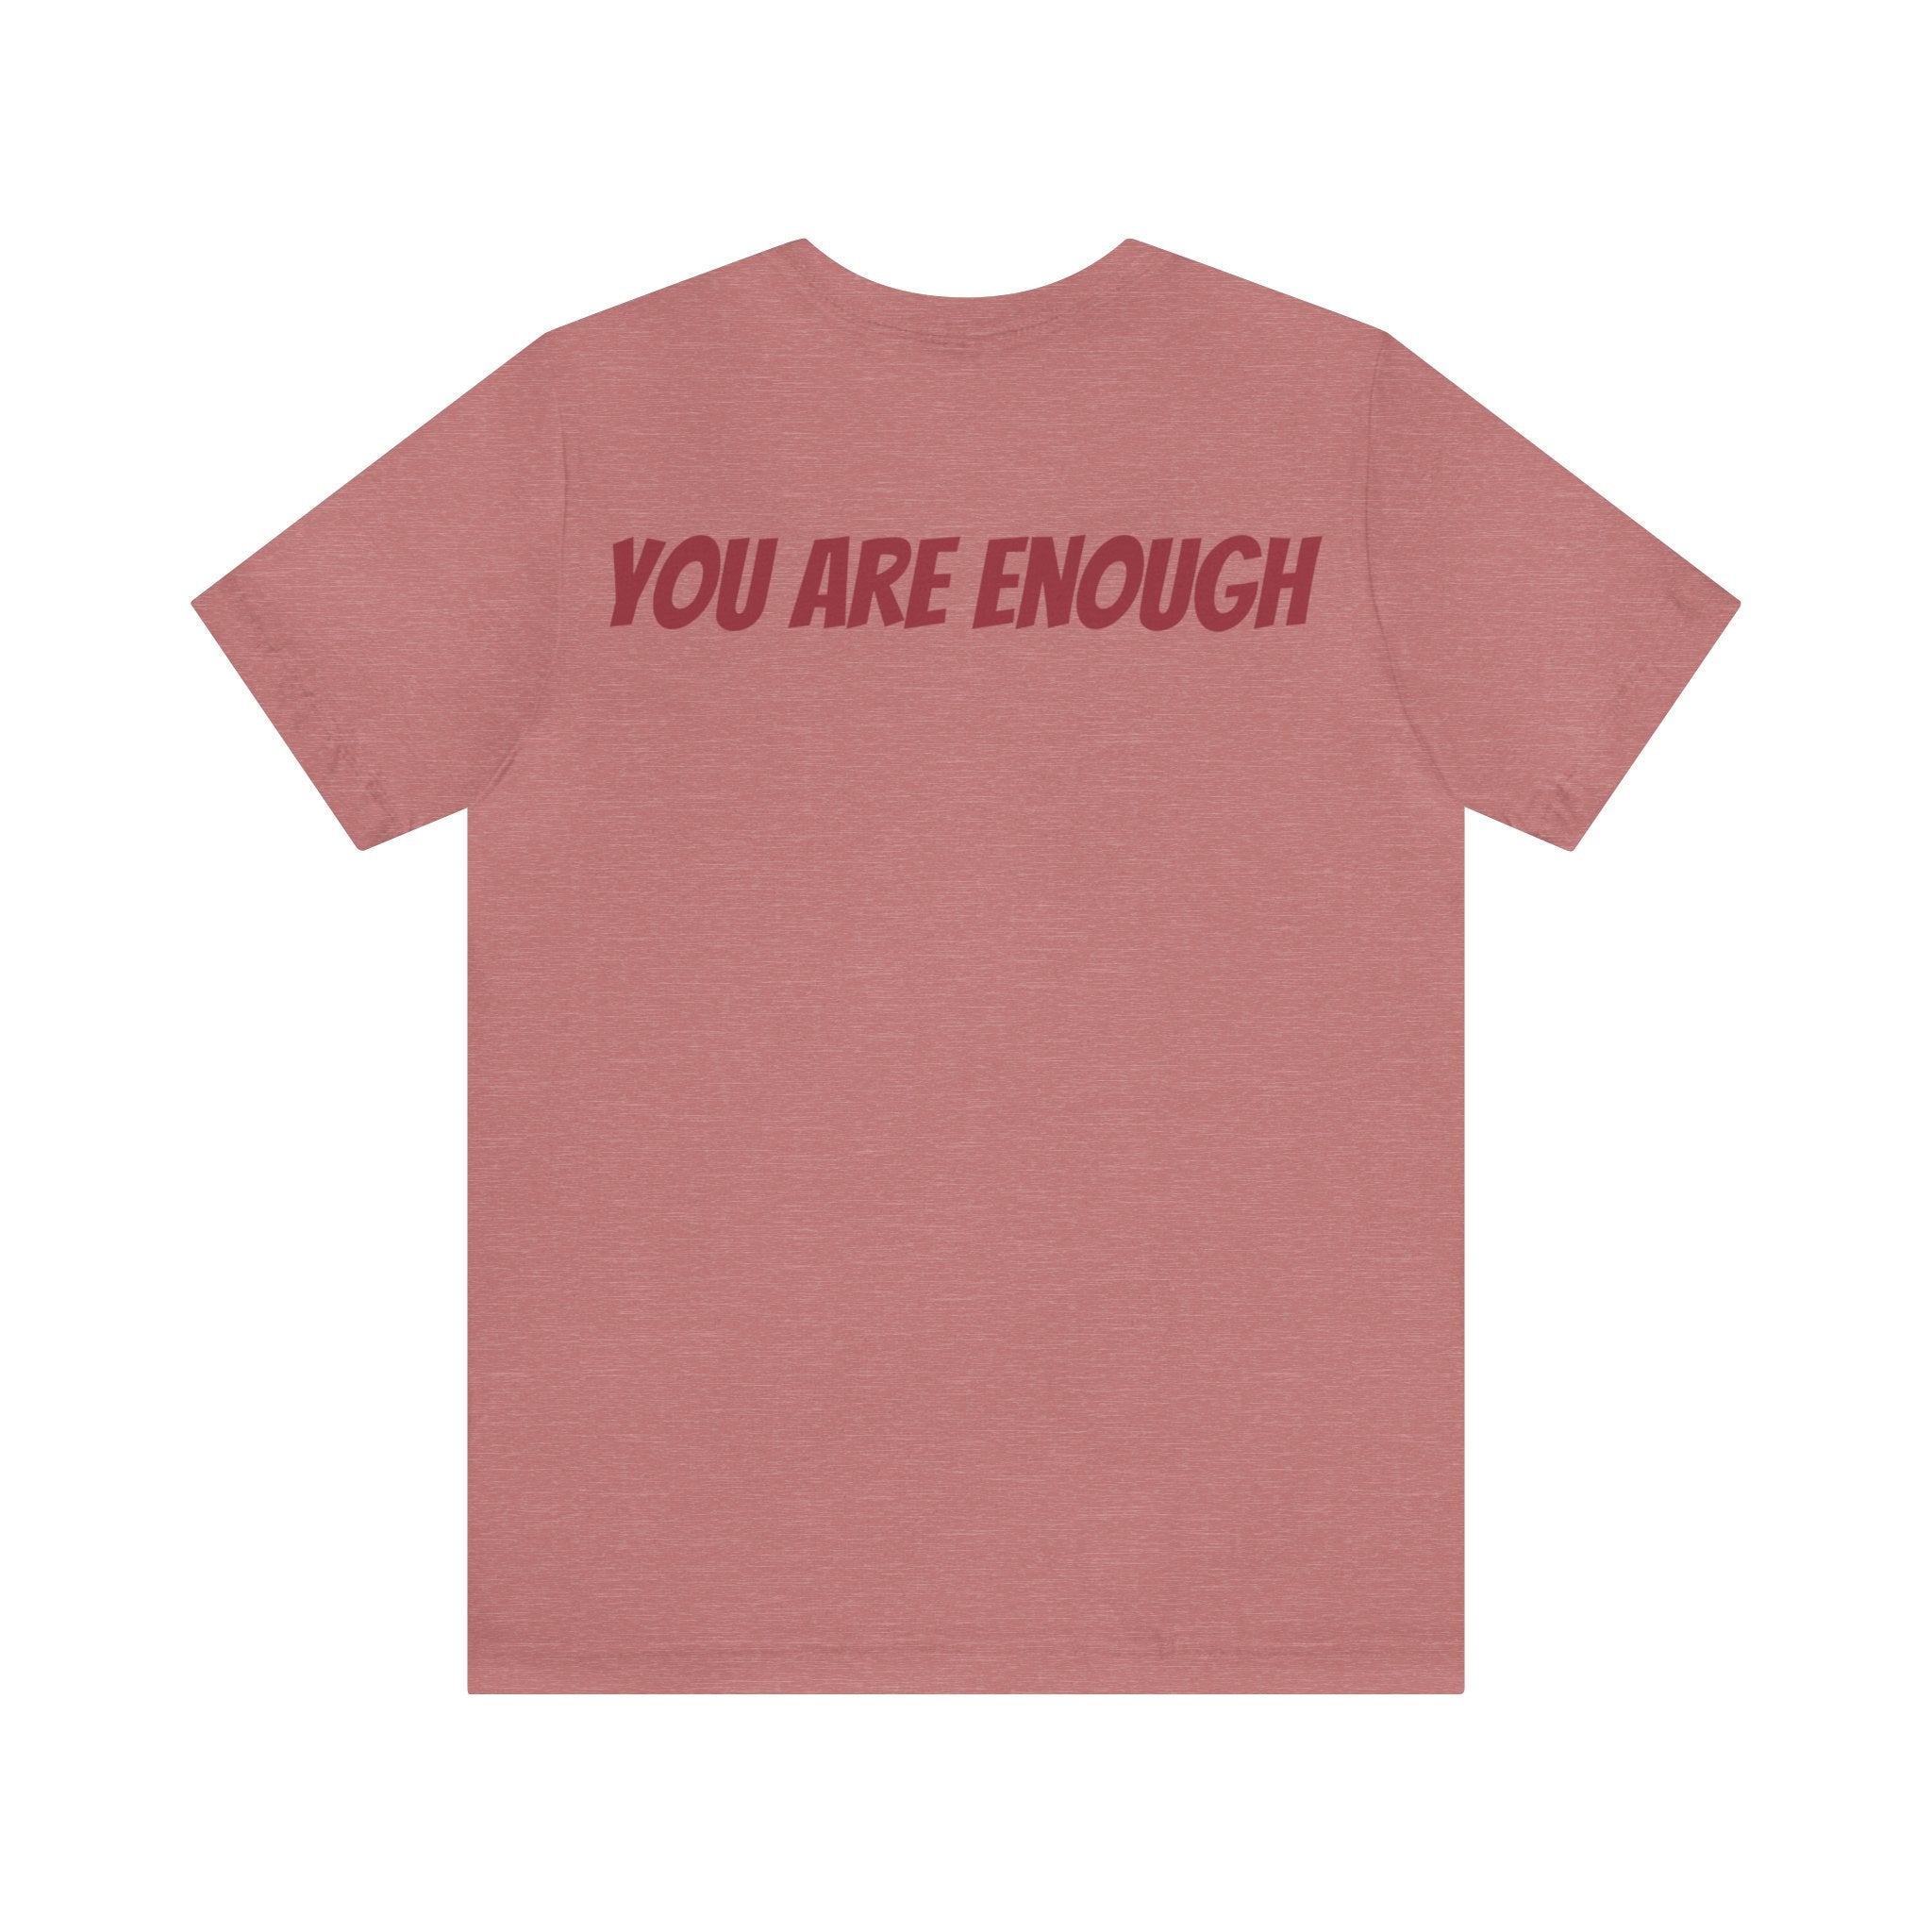 You Are Enough Short Sleeve Tee Bella+Canvas 3001 Heather Mauve Airlume Cotton Bella+Canvas 3001 Crew Neckline Jersey Short Sleeve Lightweight Fabric Mental Health Support Retail Fit Tear-away Label Tee Unisex Tee T-Shirt 8172968888353250569_2048 Printify